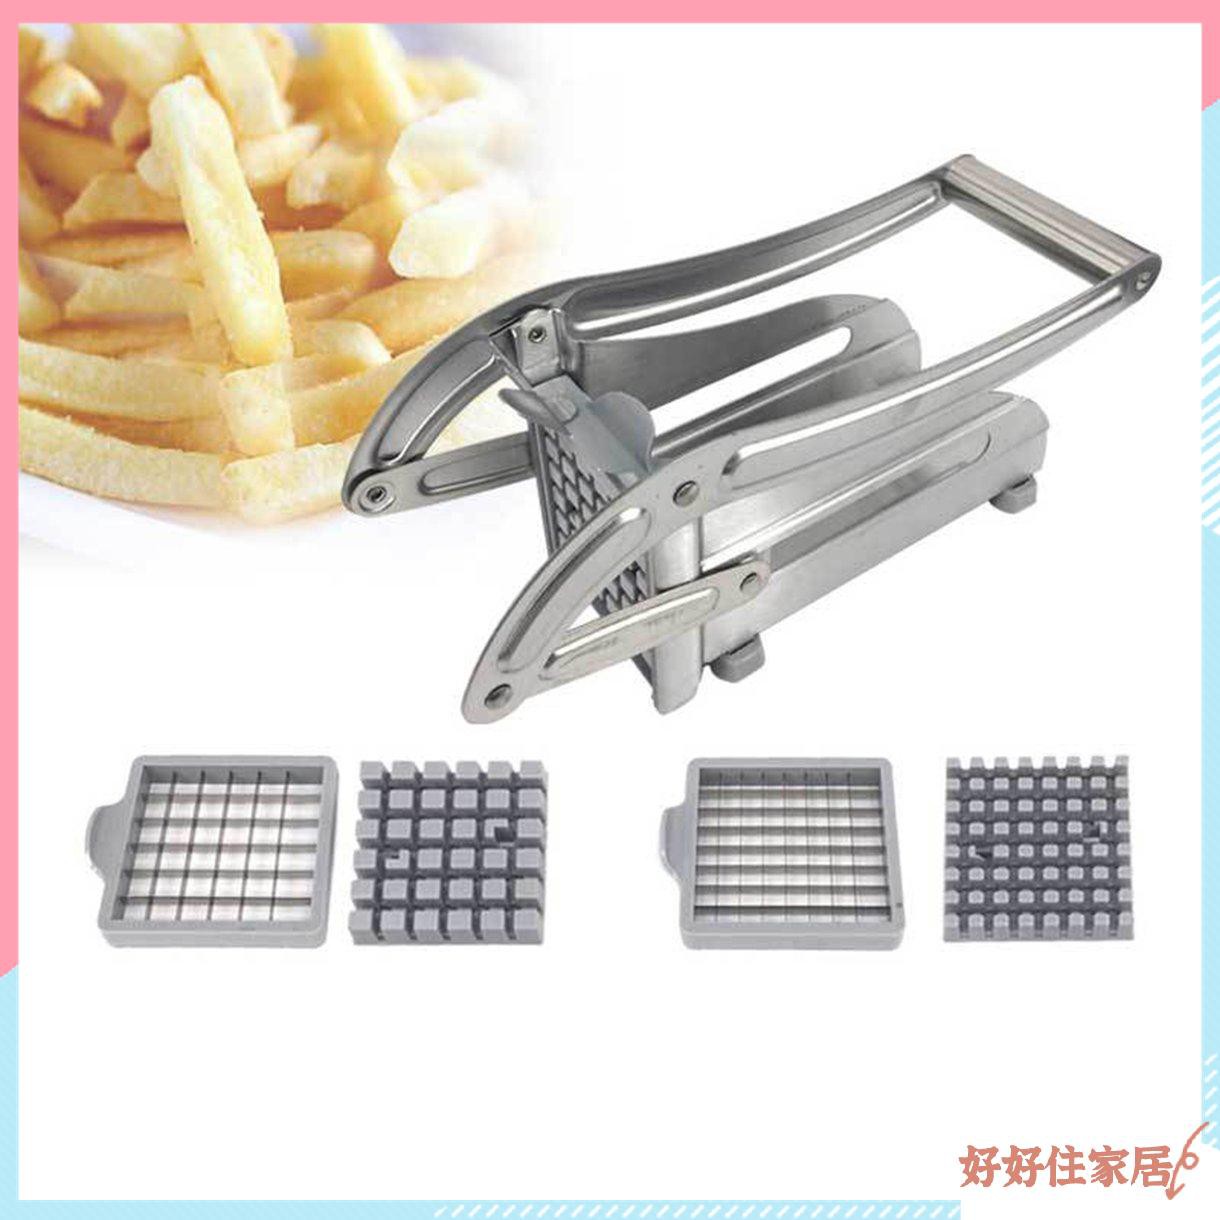 Kitchen Cooking Tools Stainless Steel French Fries Cutter Slicer